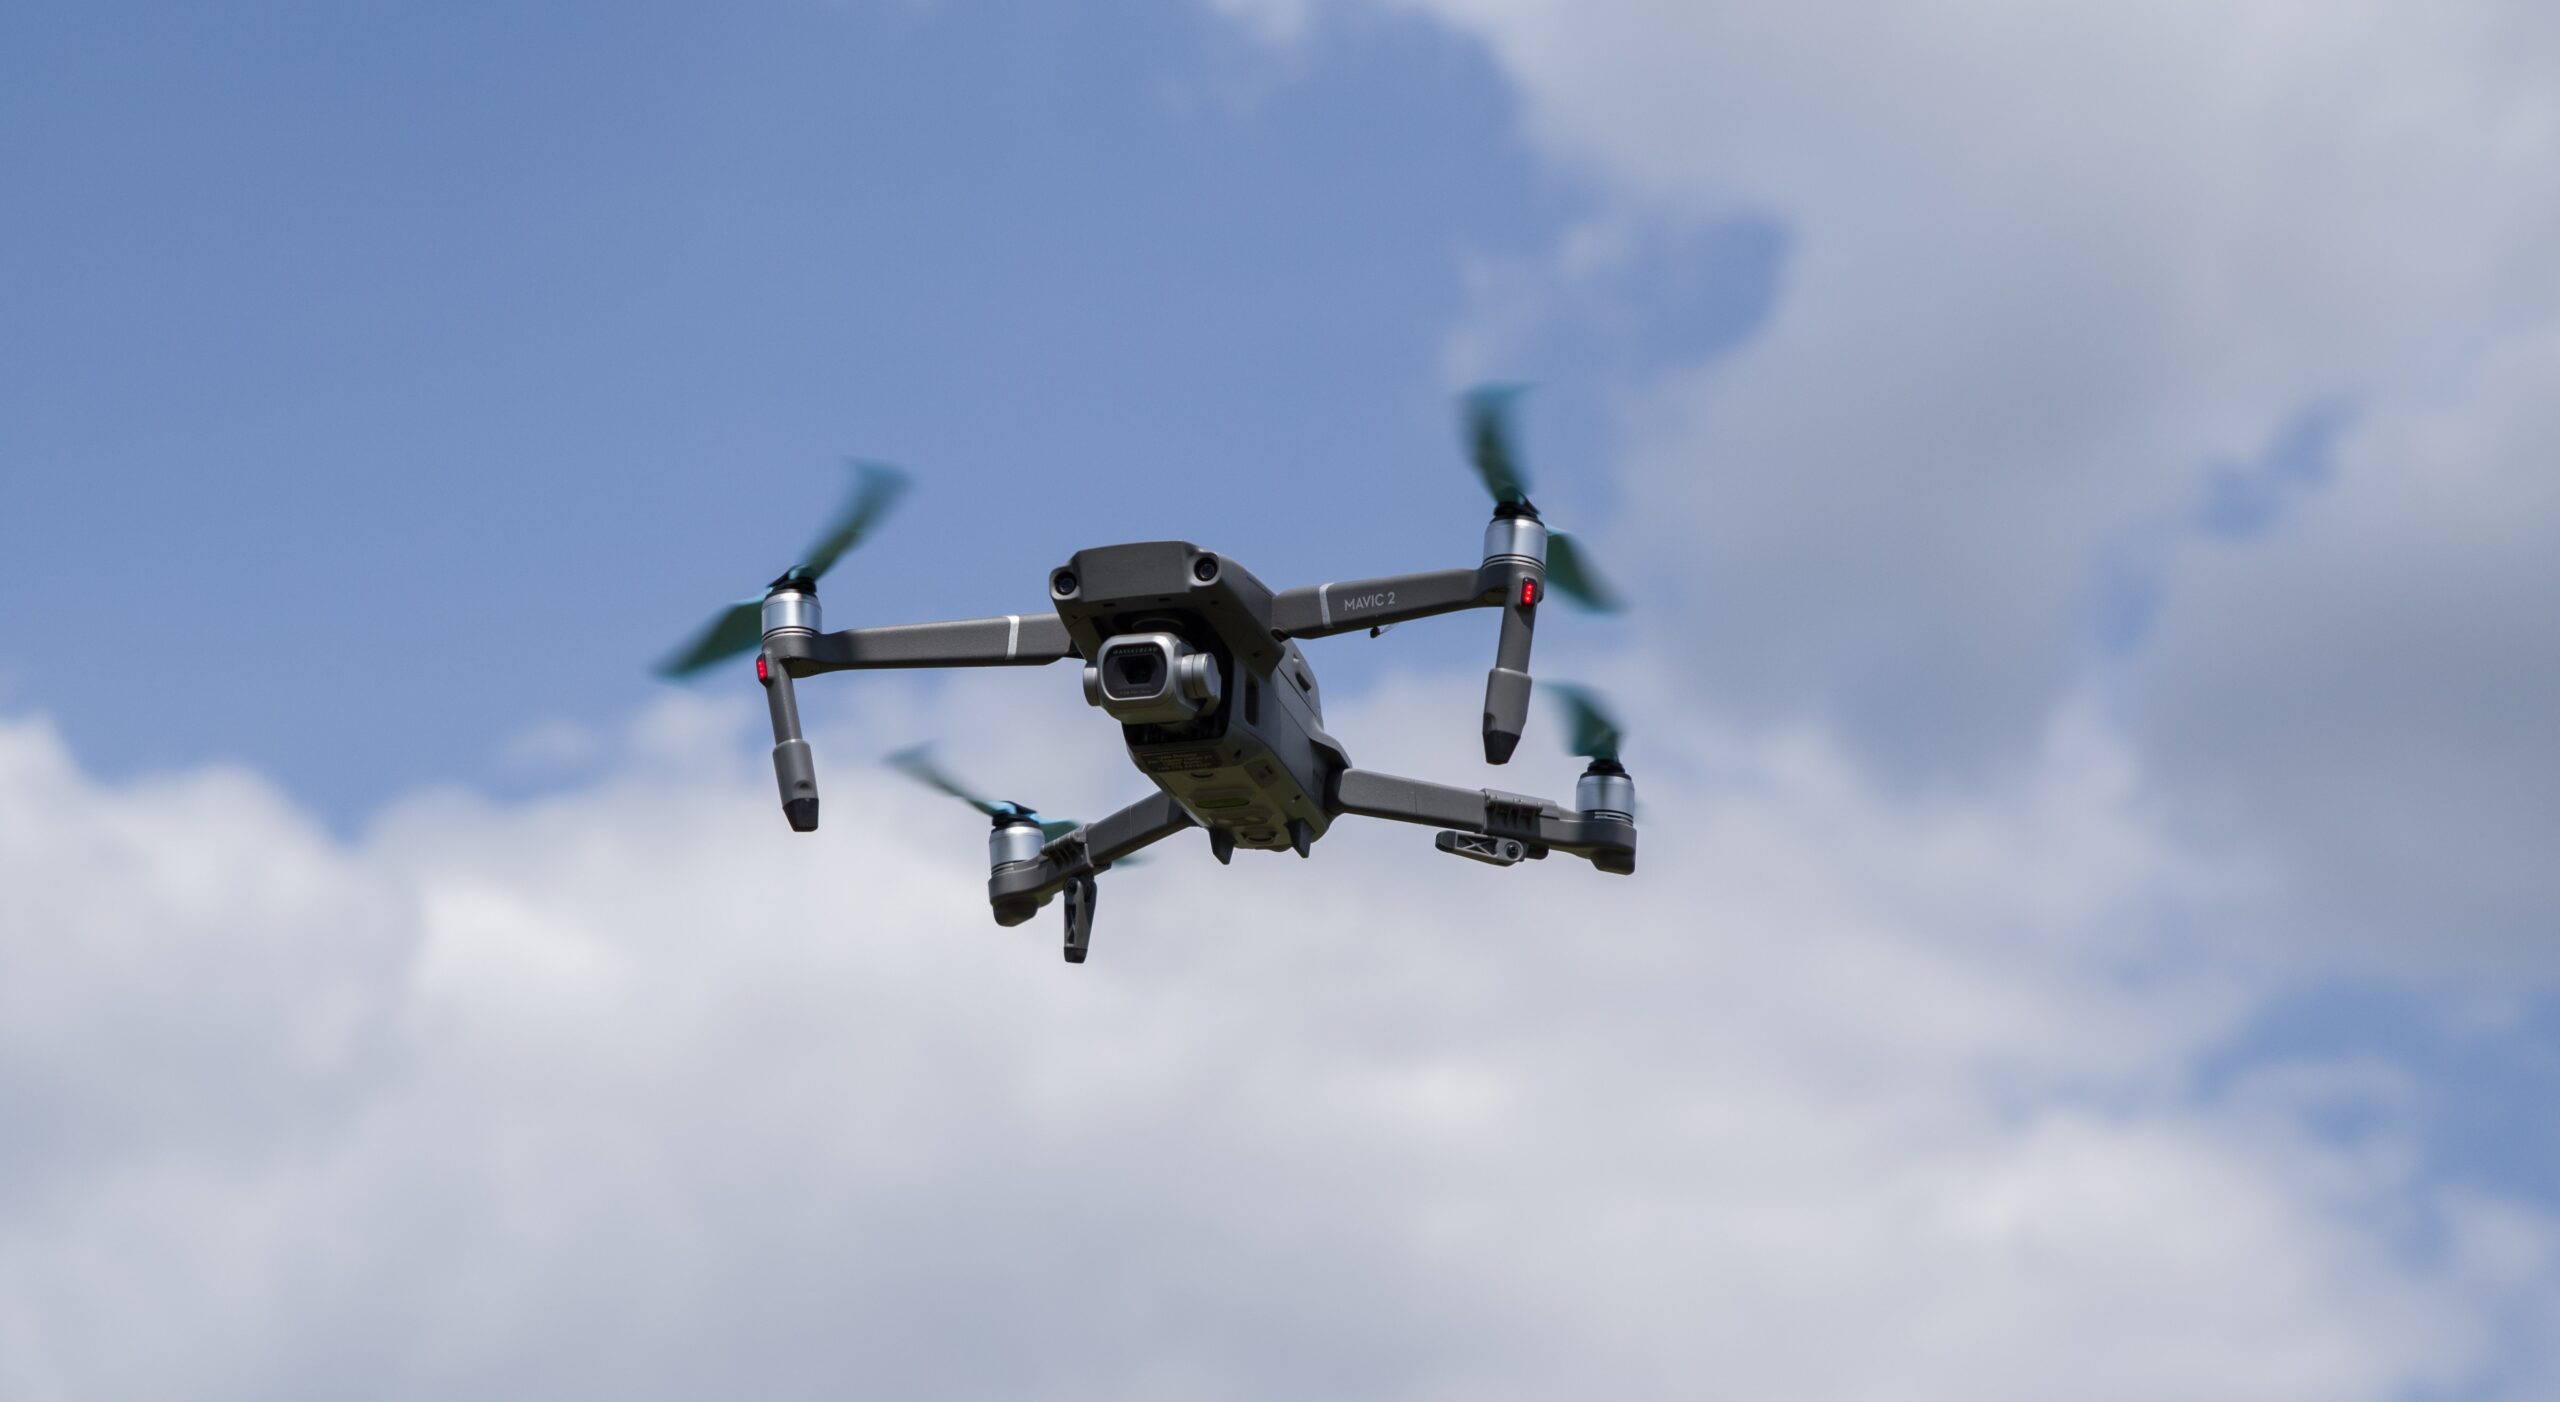 Thieves use drones to pursue valuable targets in street robberies on Spain’s Costa Blanca